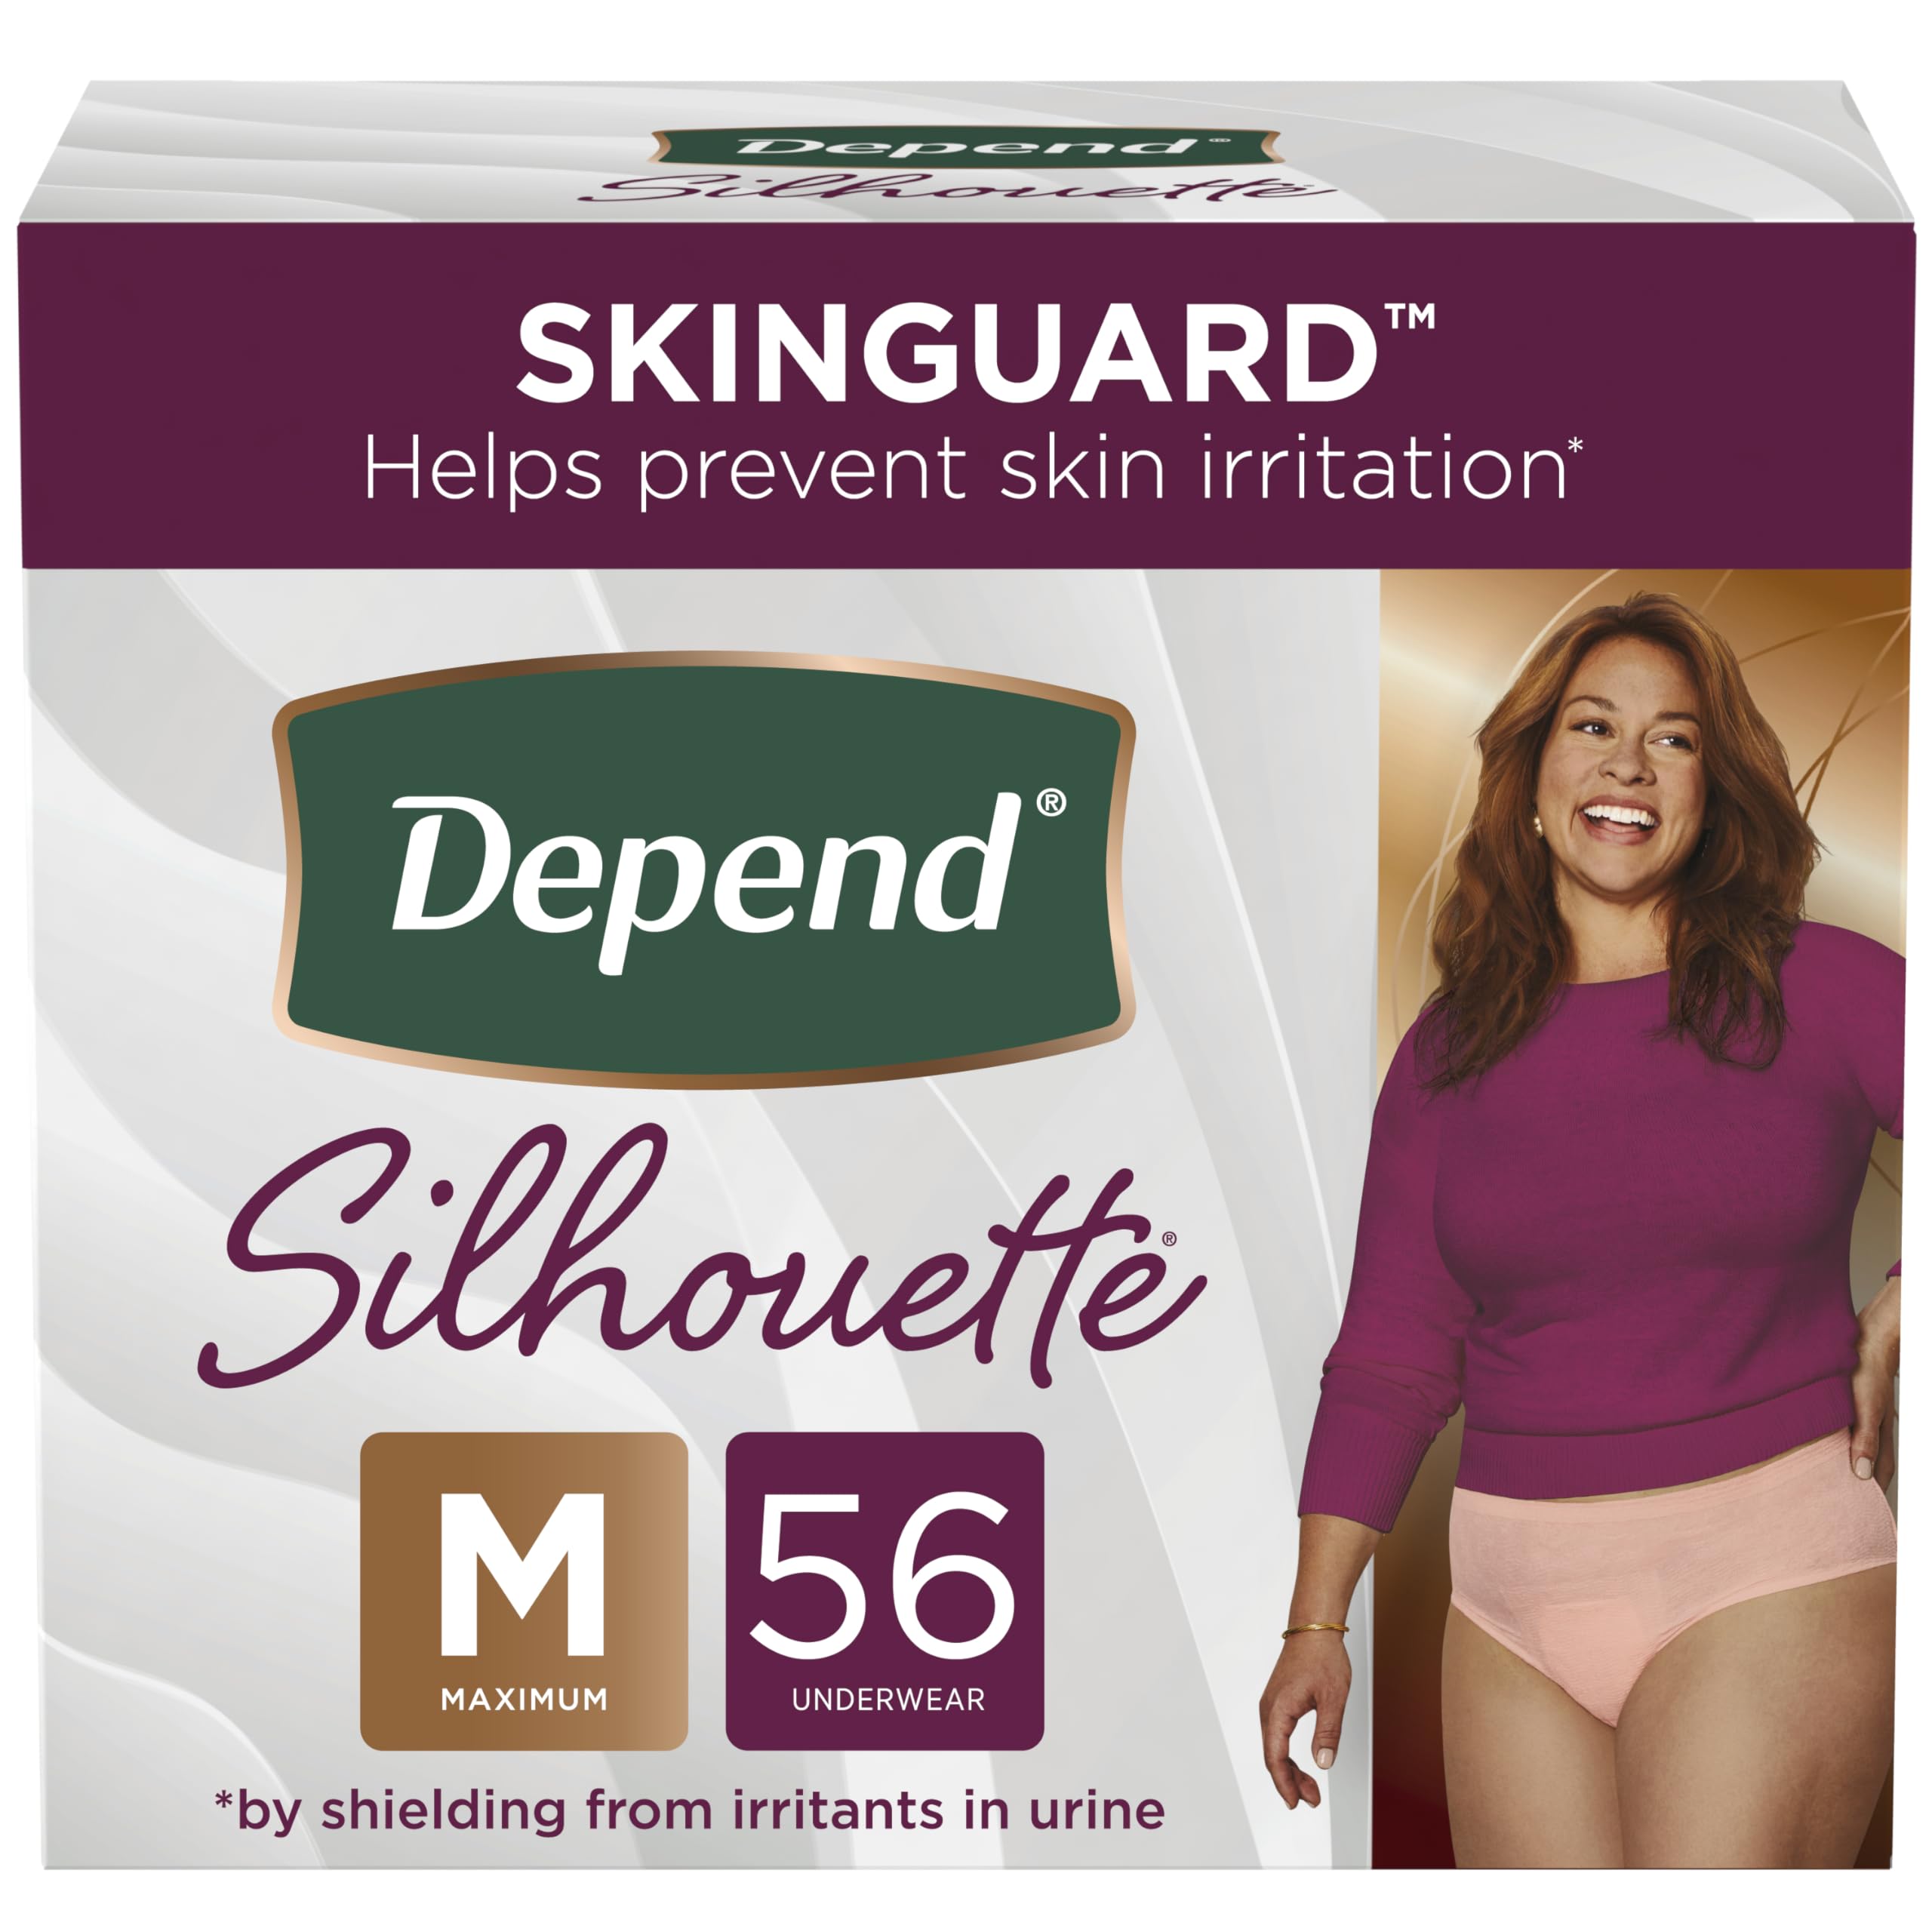 Depend Silhouette Women's Incontinence Underwear, Medium, Maximum Absorbency - 56 Count (2 Packs of 28)